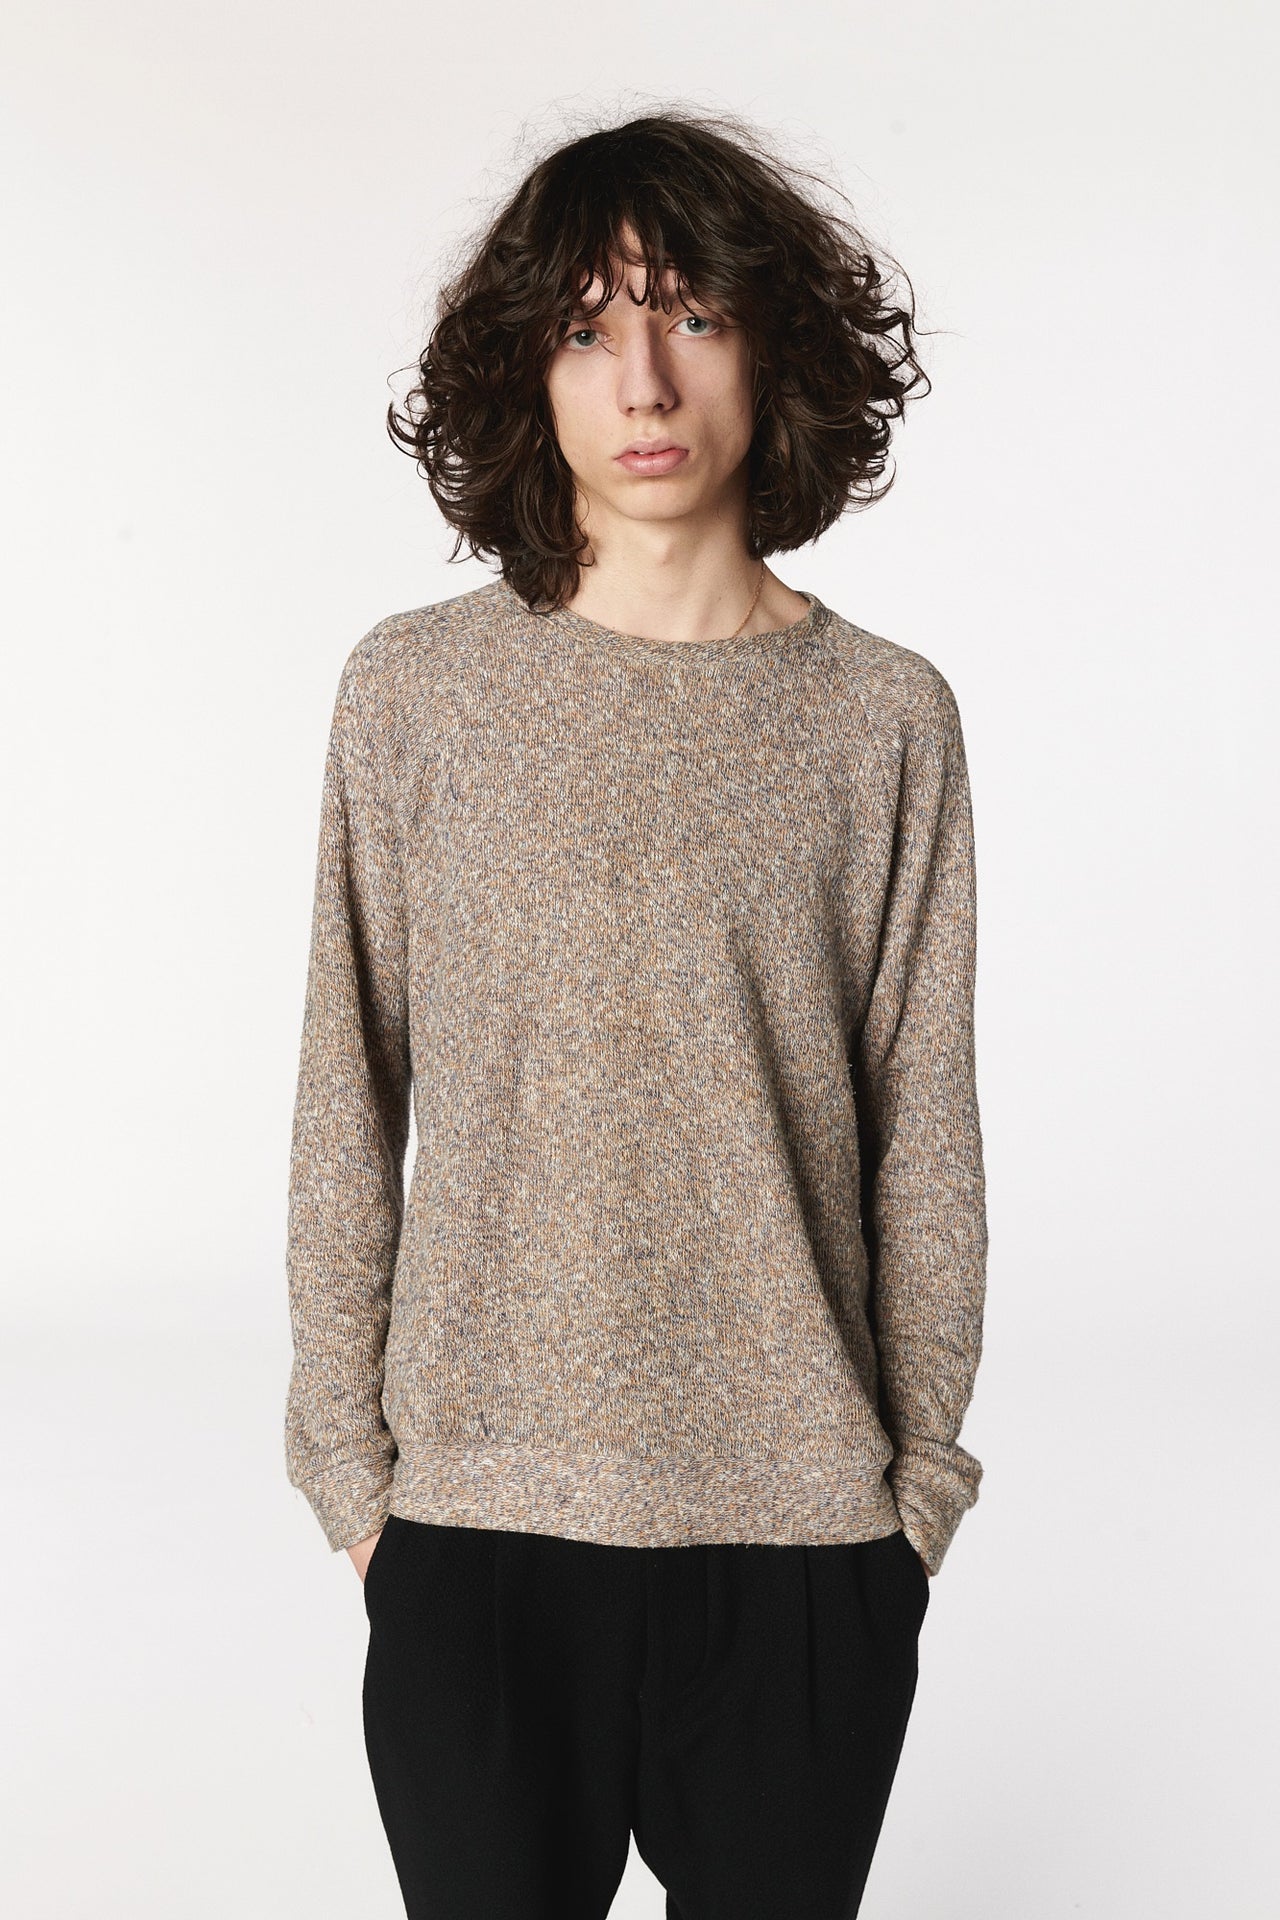 Long Sleeve Sweatshirt in a Beige, Brown and Cream Melange Japanese Double Sided Cotton Knit